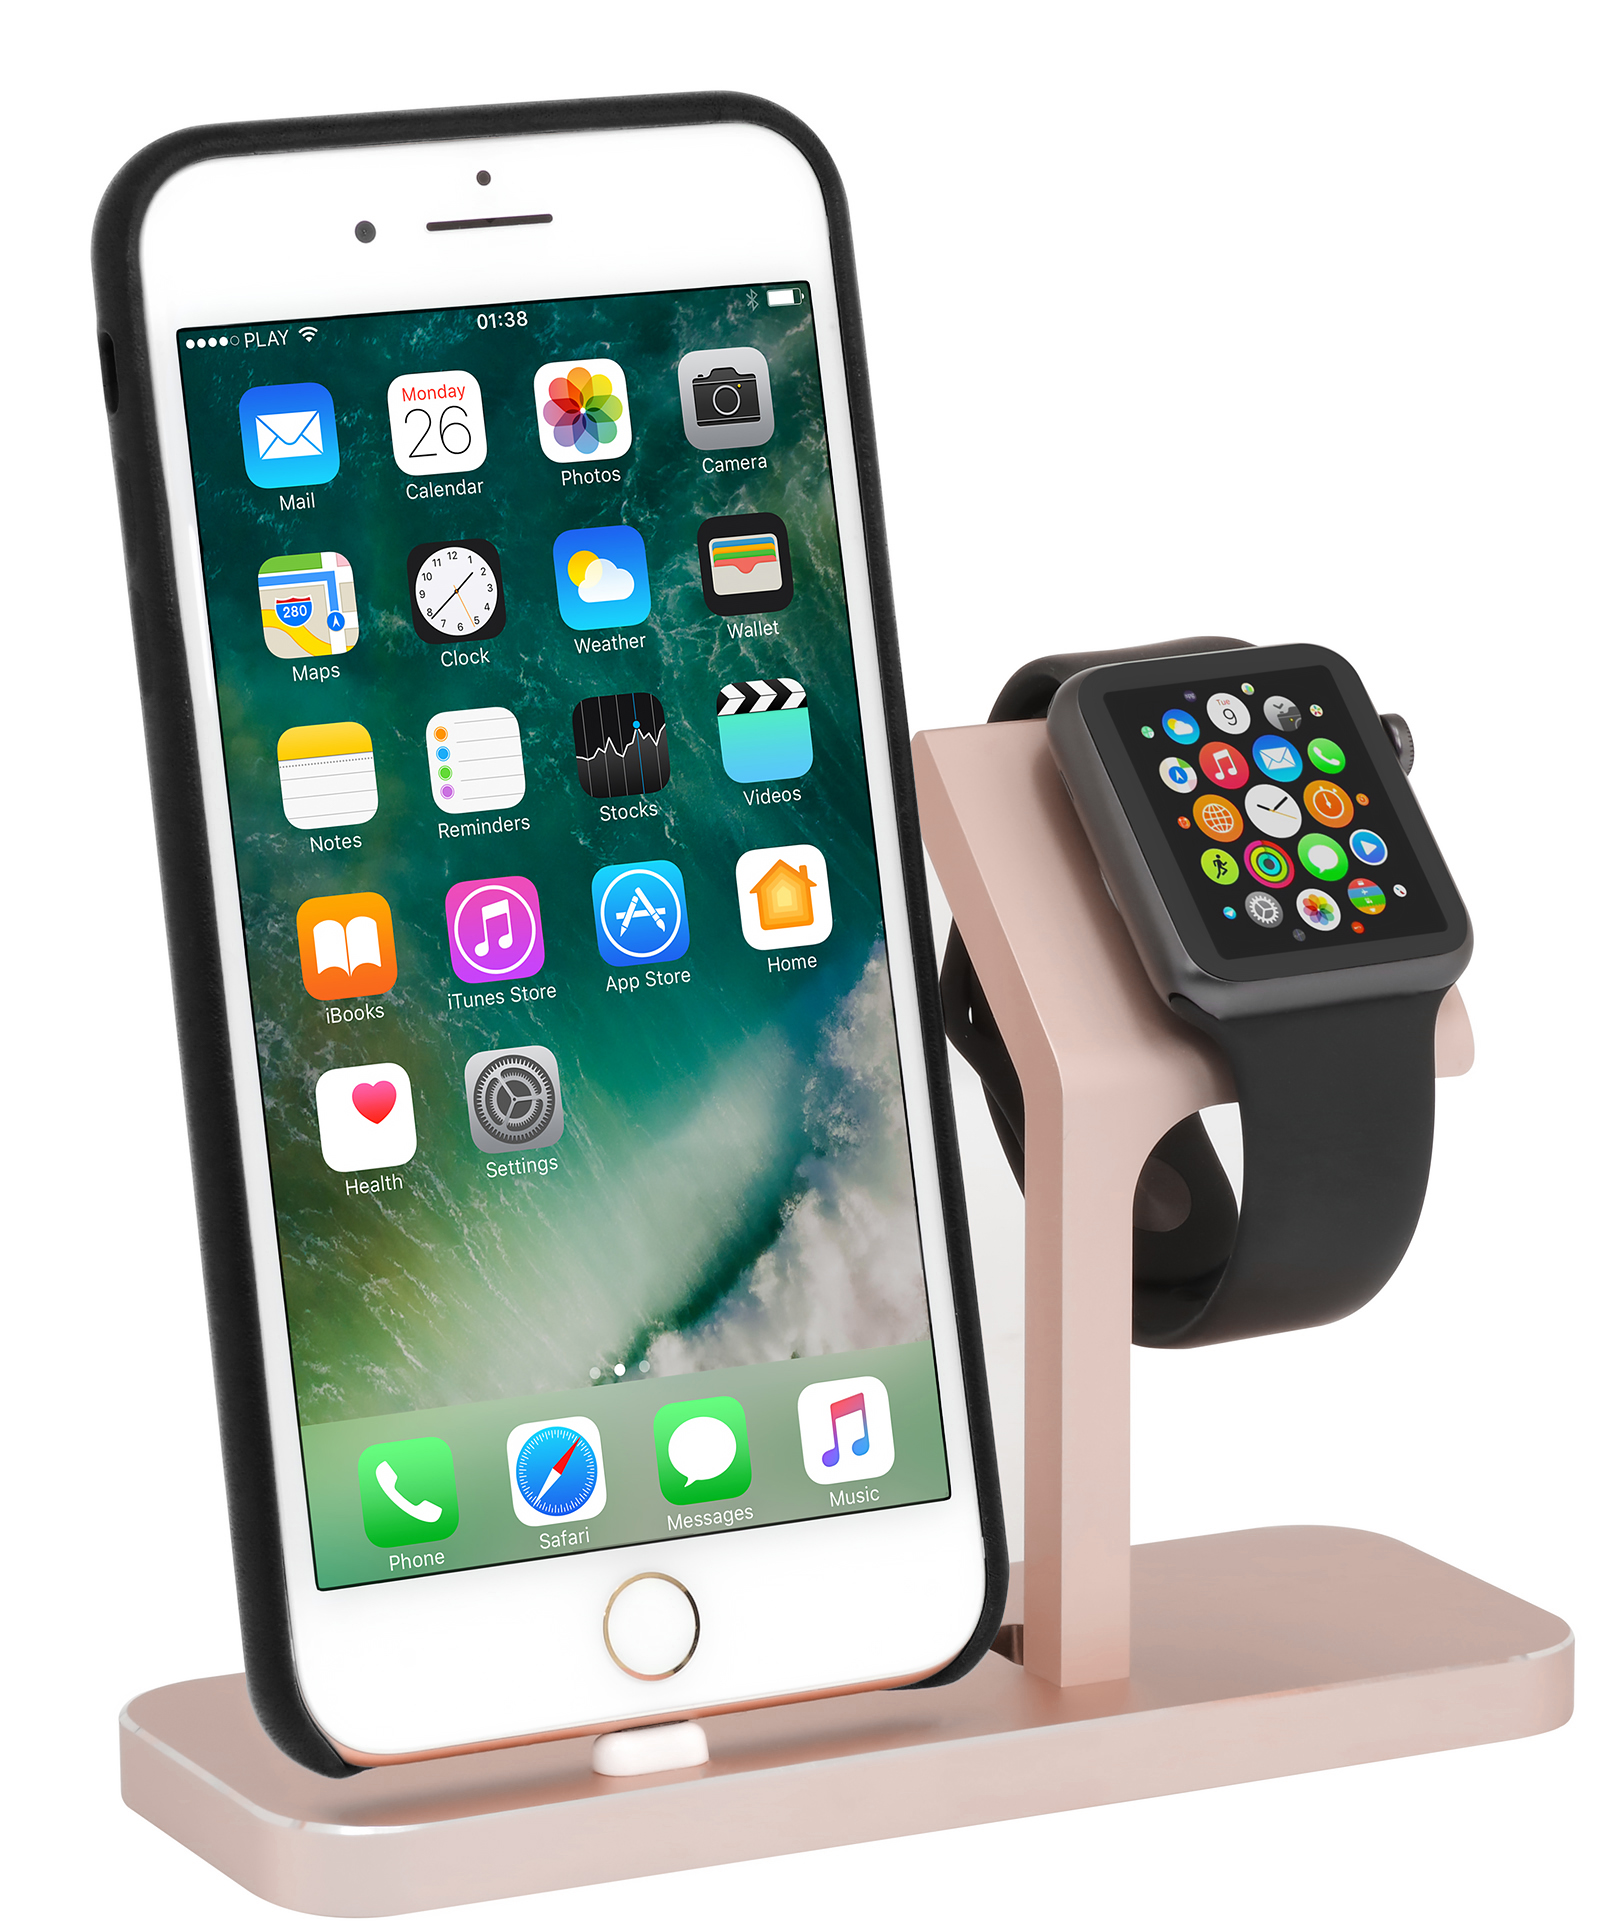 iphone docking station with speakers